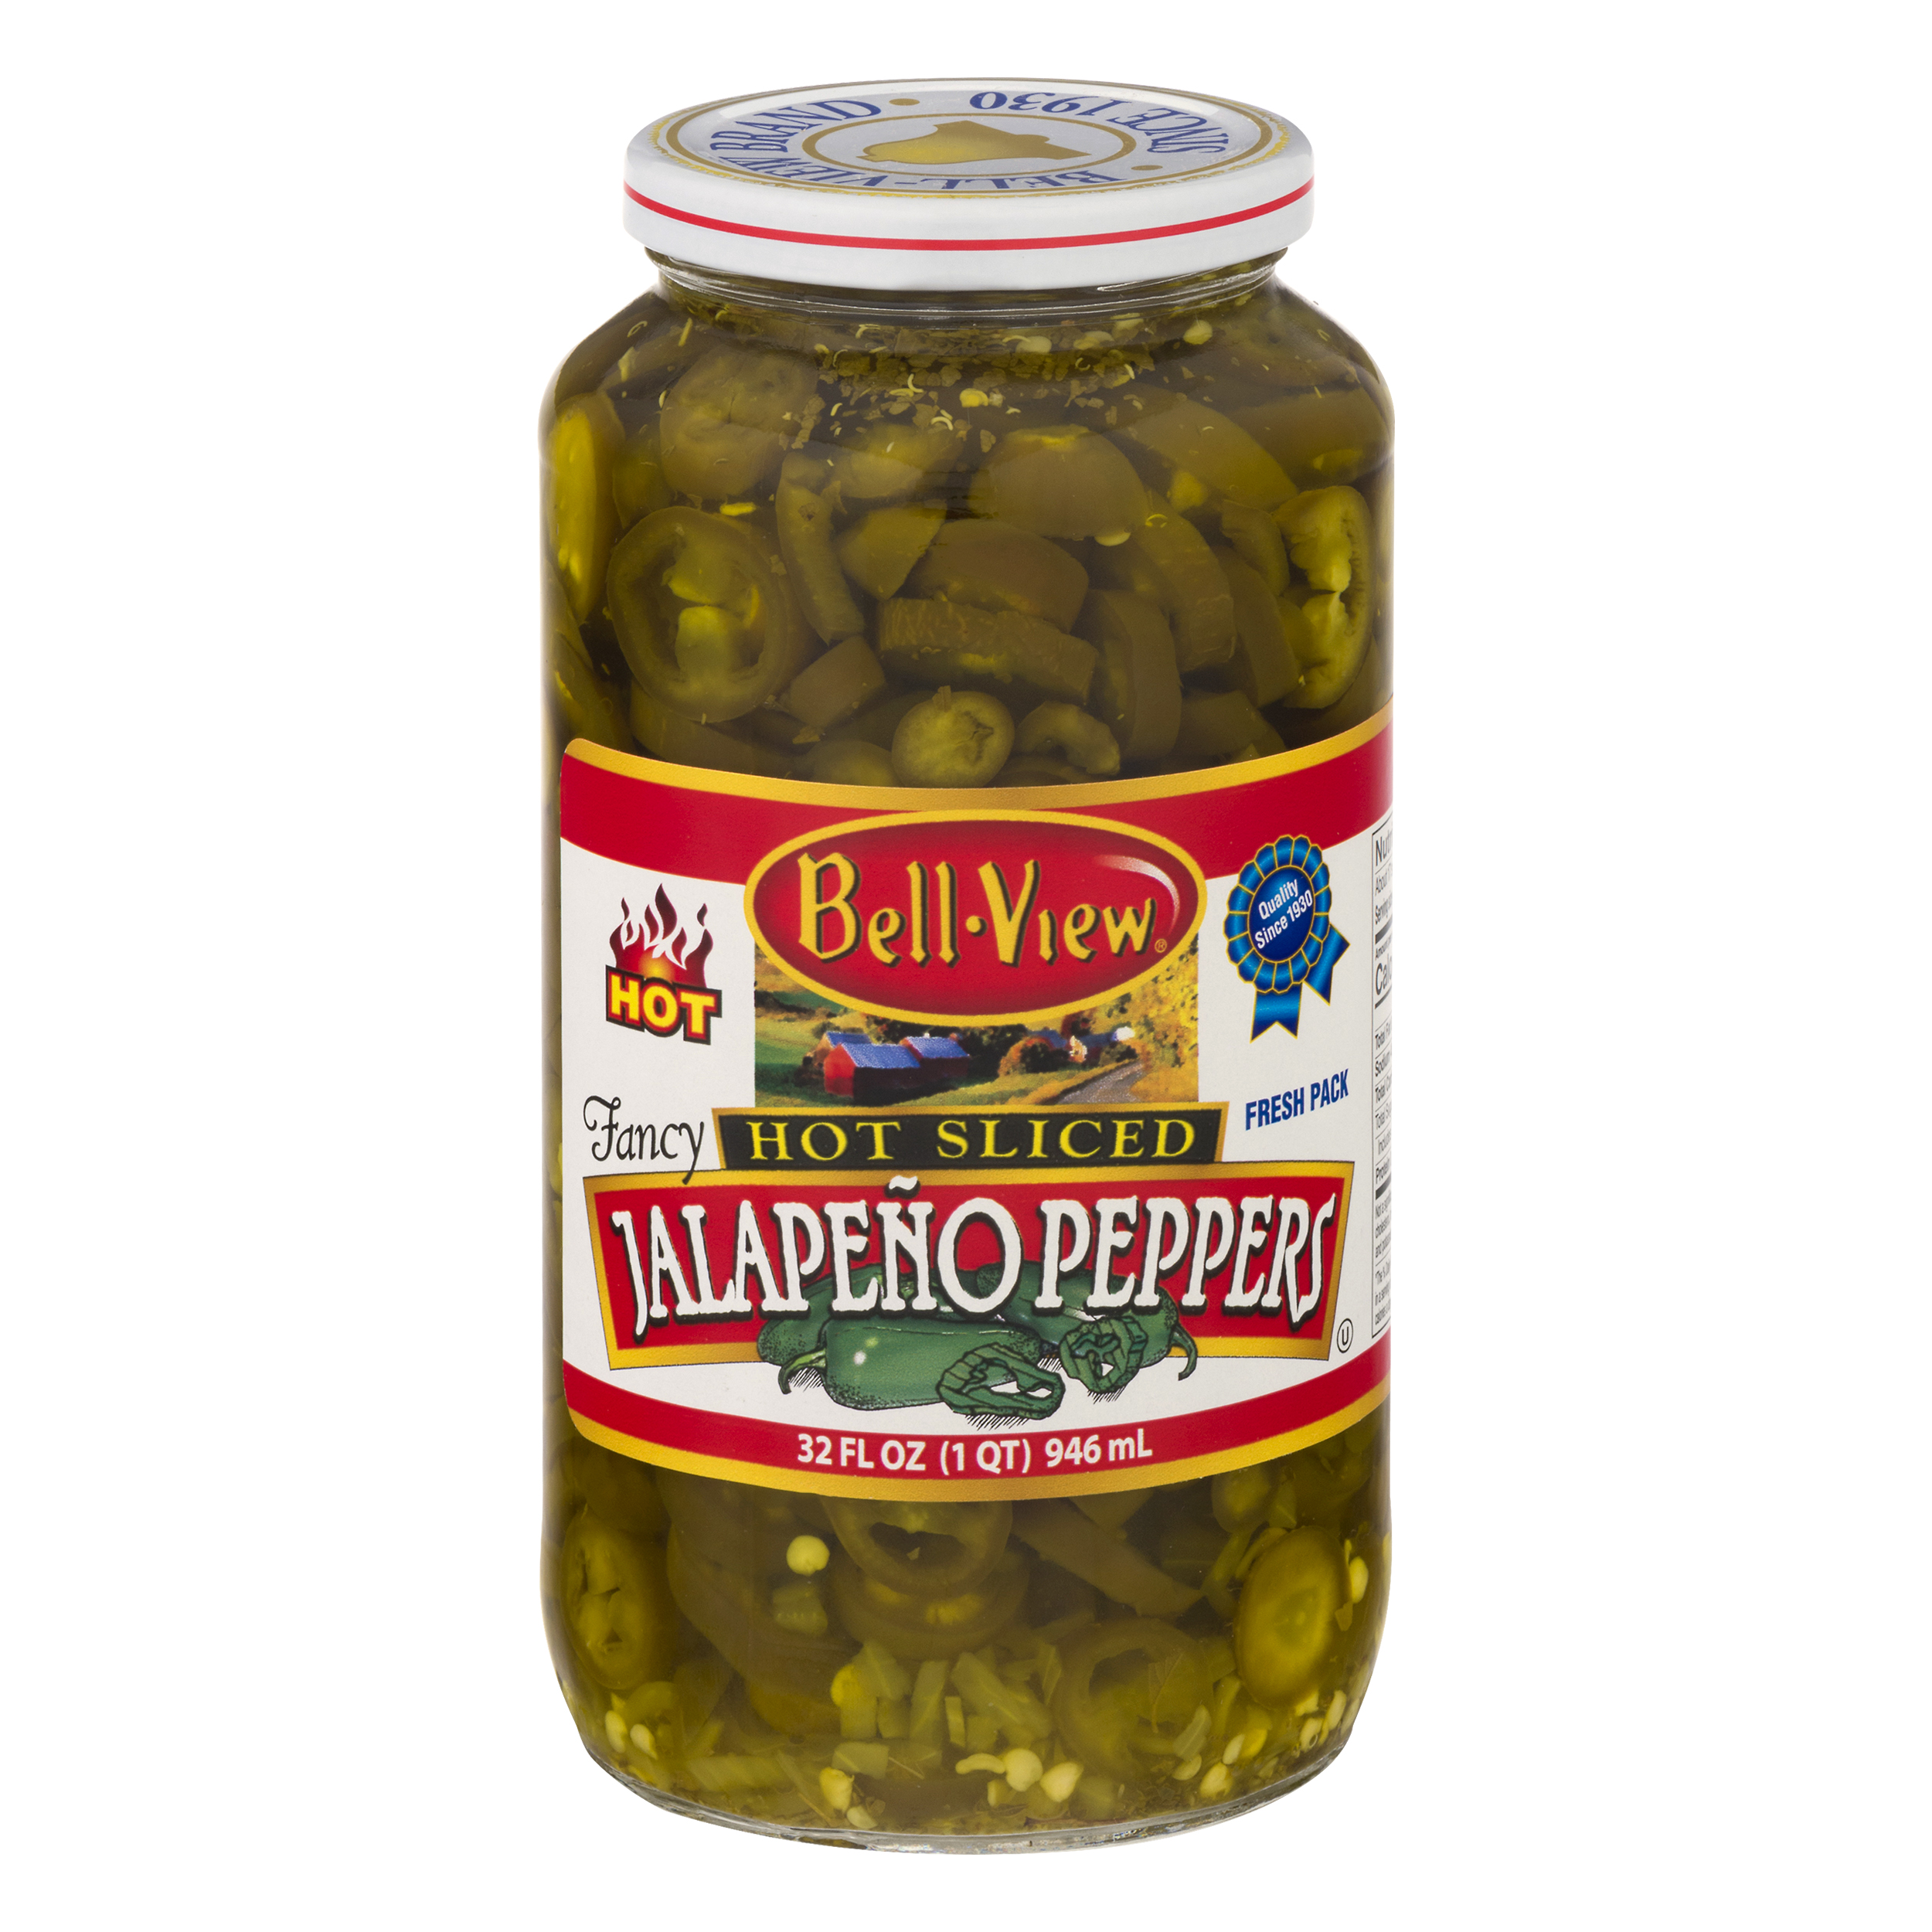 Bell View Hot Sliced Fresh Pack Jalapeno Peppers 32 Oz